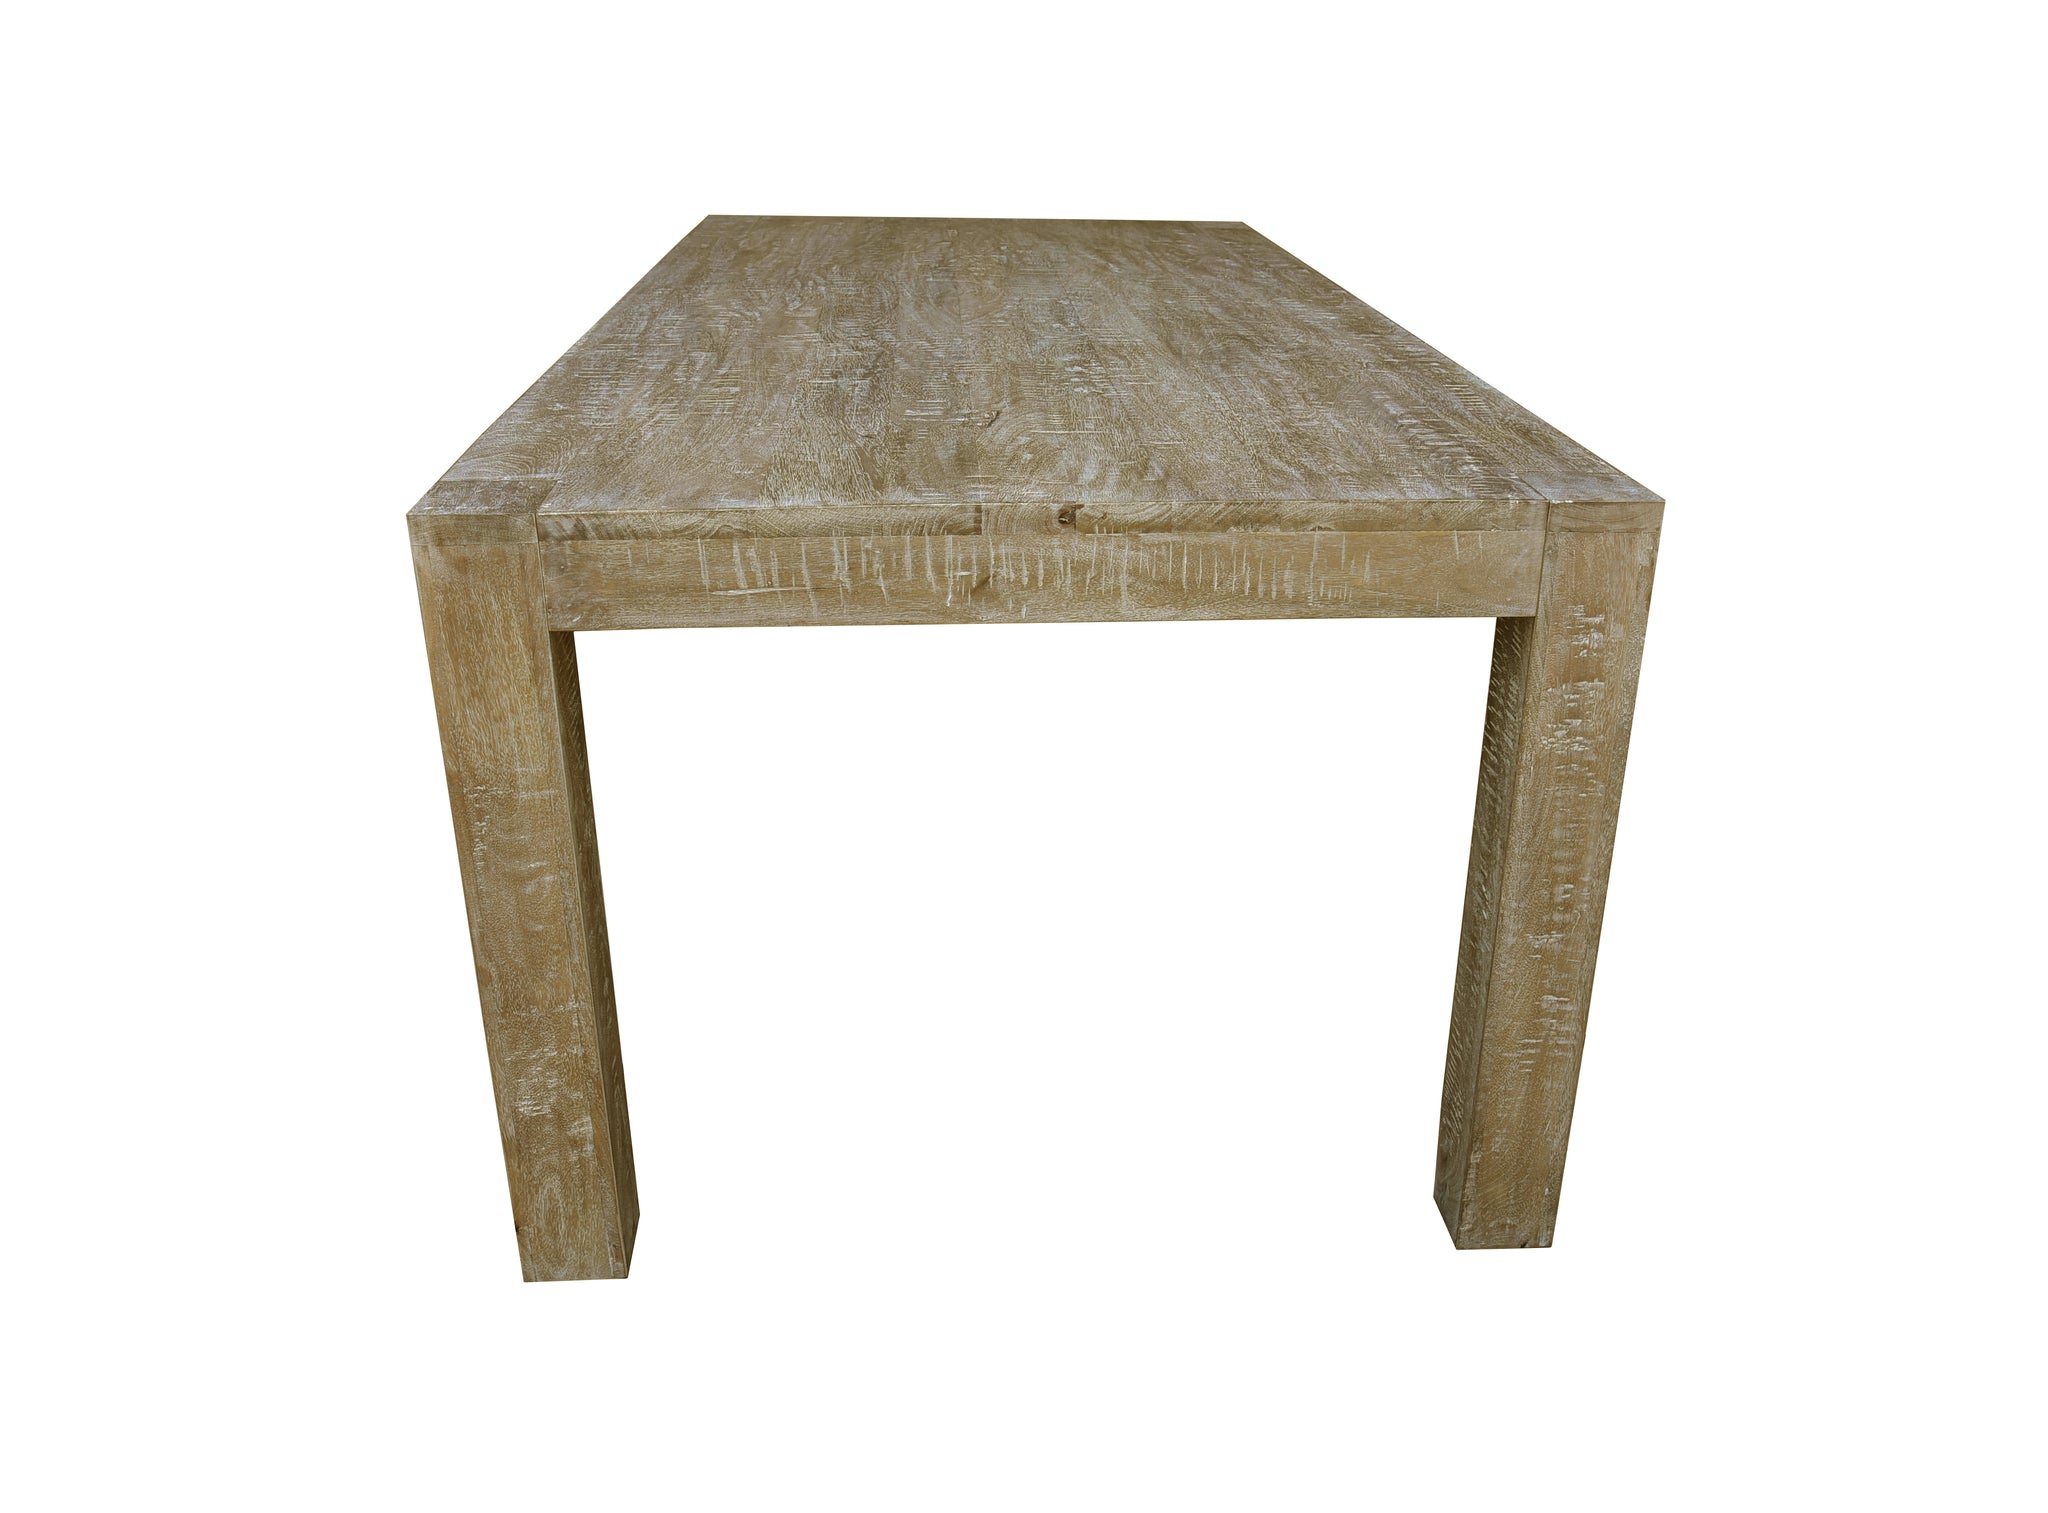 Chase Dining Table